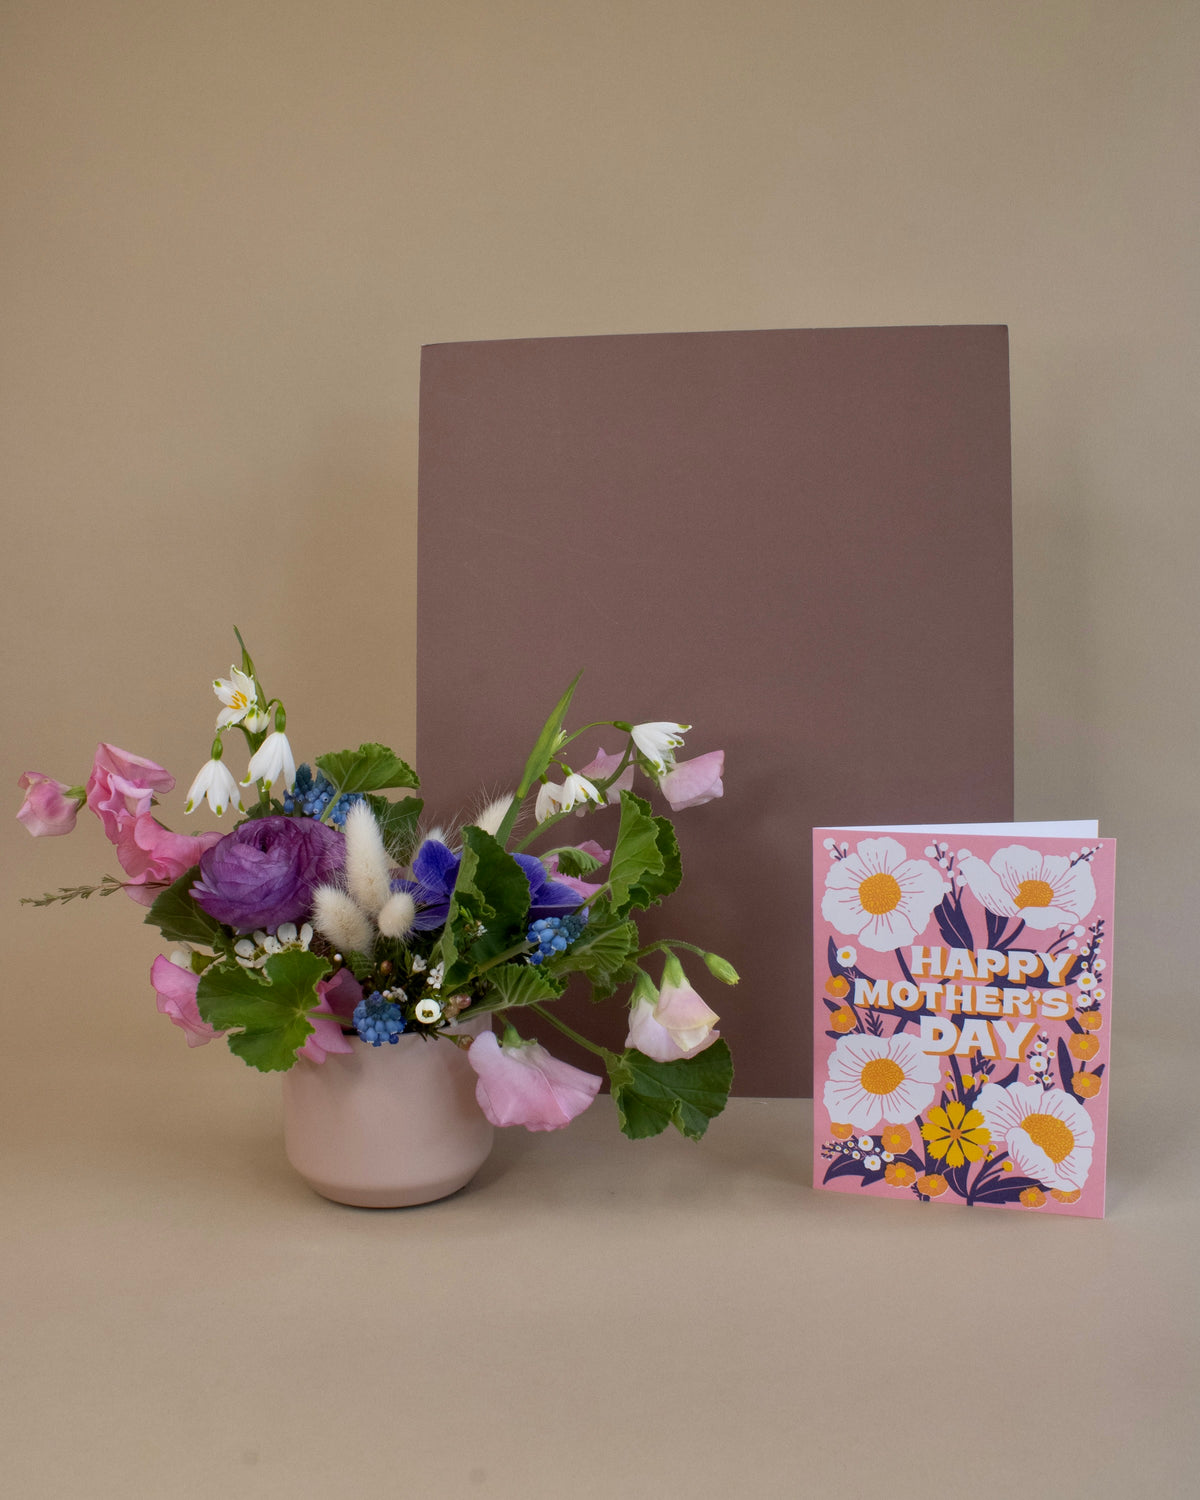 Mother's Day: The Sweet Pea Arrangement